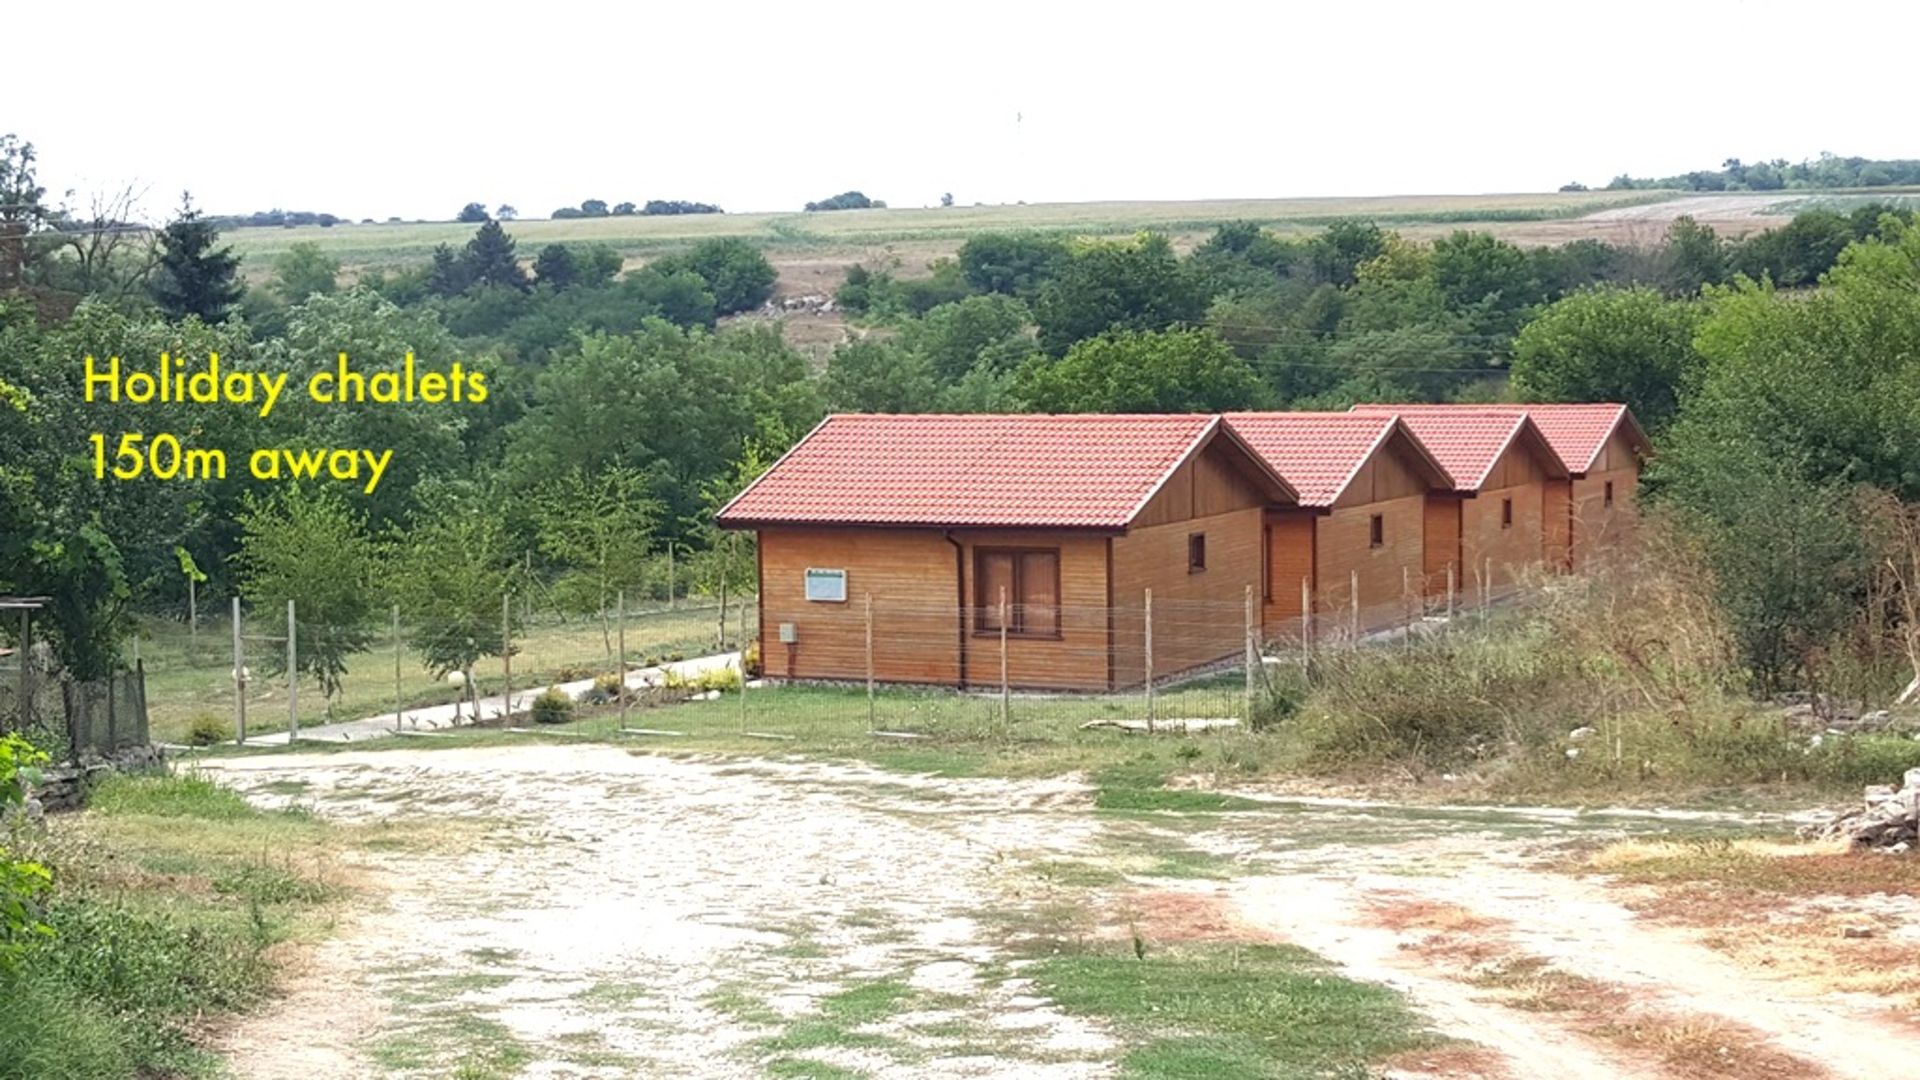 SUNFLOWER COTTAGE IN KRASEN, BULGARIA  - 30 miles from Beach! - Image 32 of 64